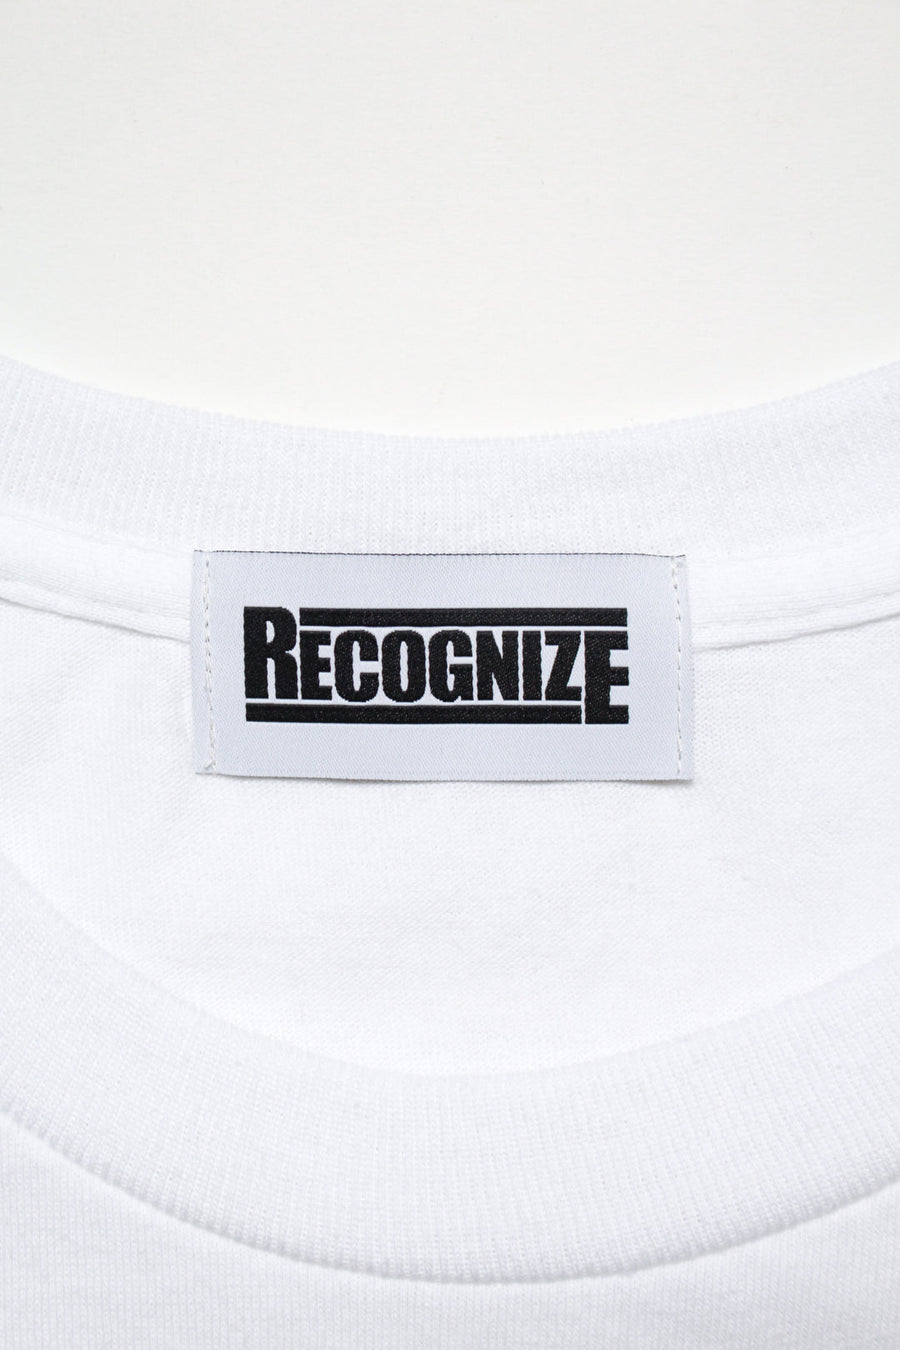 〈RECOGNIZE〉KING OF DIGGIN' TEE